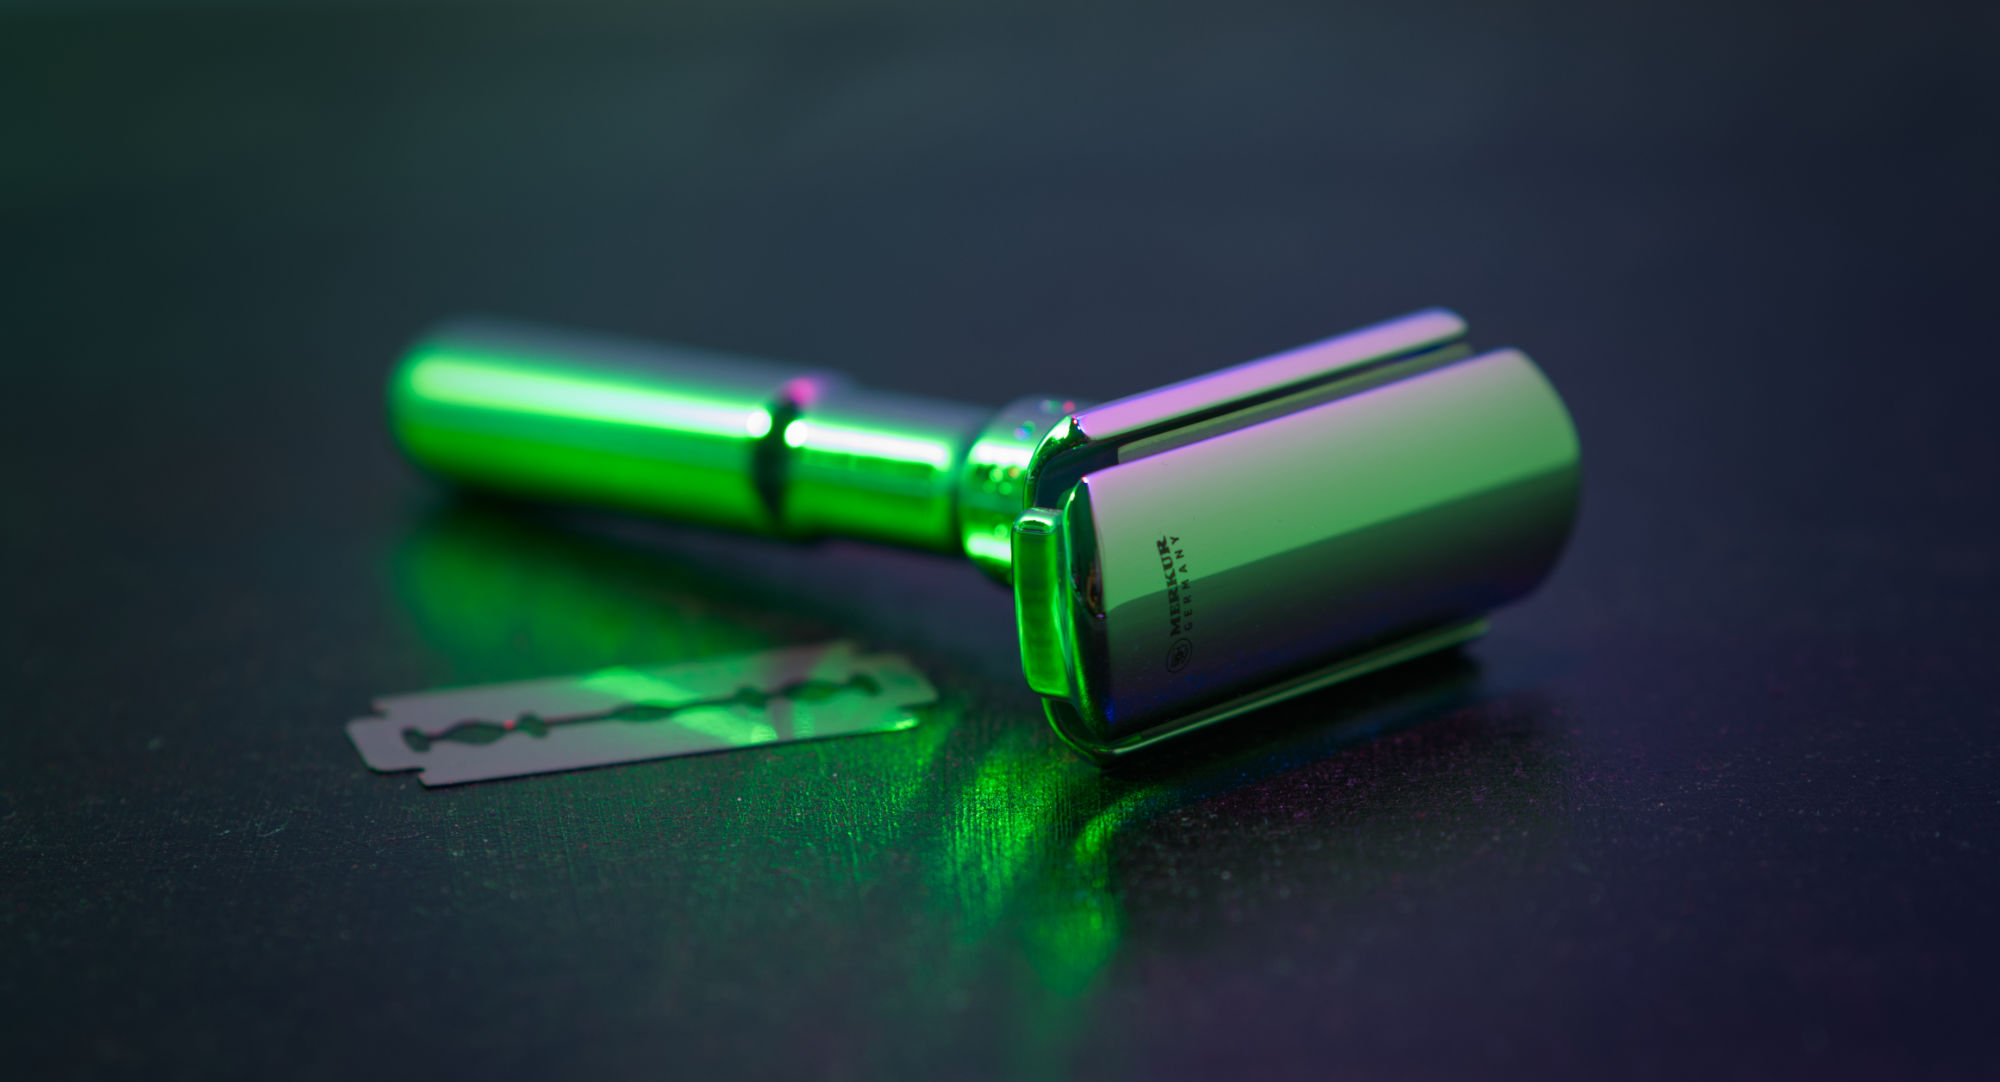 Photo of a chrome safety razor and a razor blade in green-ish lighting, view from the front showing the head holding the blade